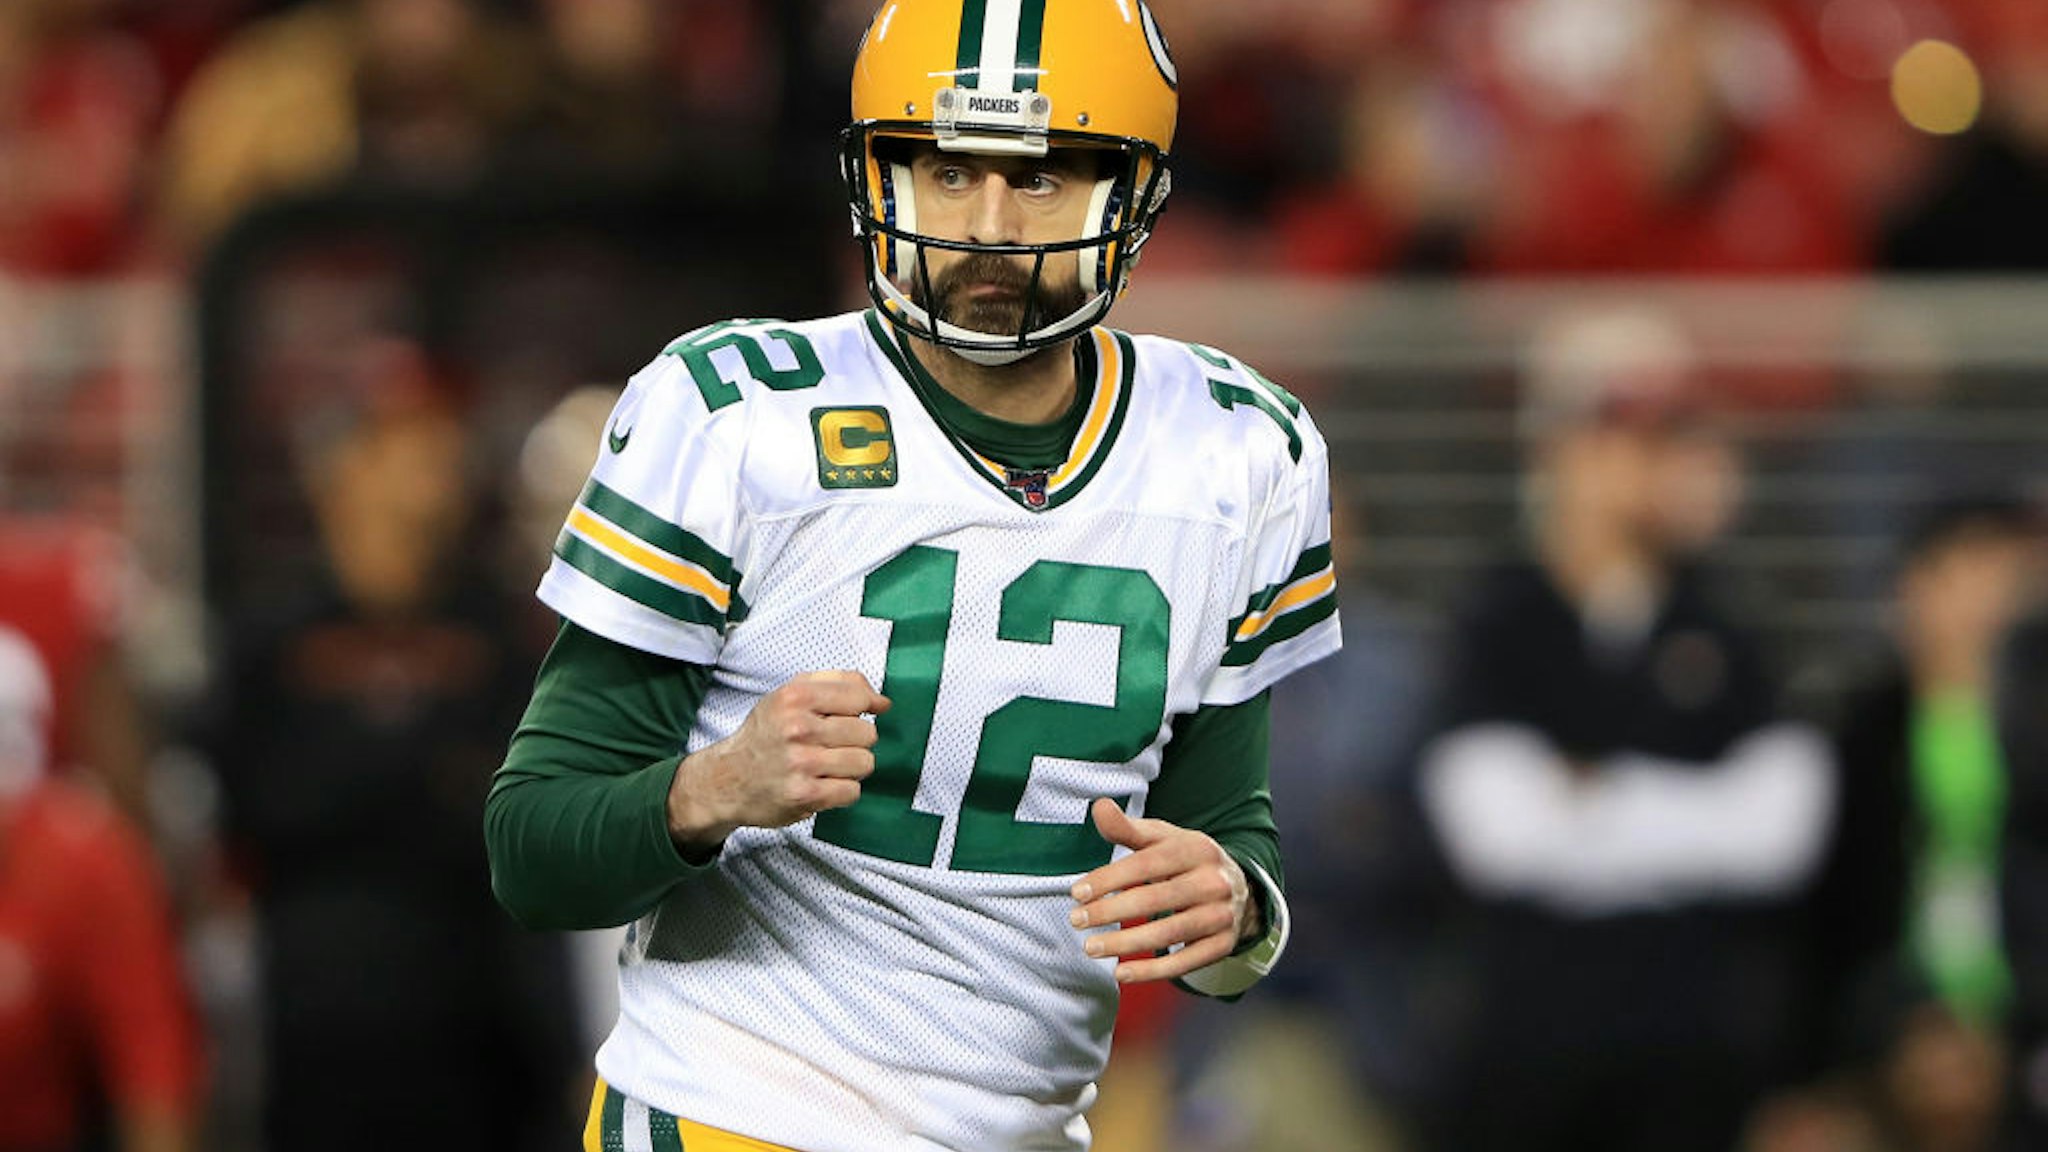 SANTA CLARA, CALIFORNIA - JANUARY 19: Aaron Rodgers #12 of the Green Bay Packers celebrates a touchdown against the San Francisco 49ers during the second half of the NFC Championship game at Levi's Stadium on January 19, 2020 in Santa Clara, California. (Photo by Sean M. Haffey/Getty Images)